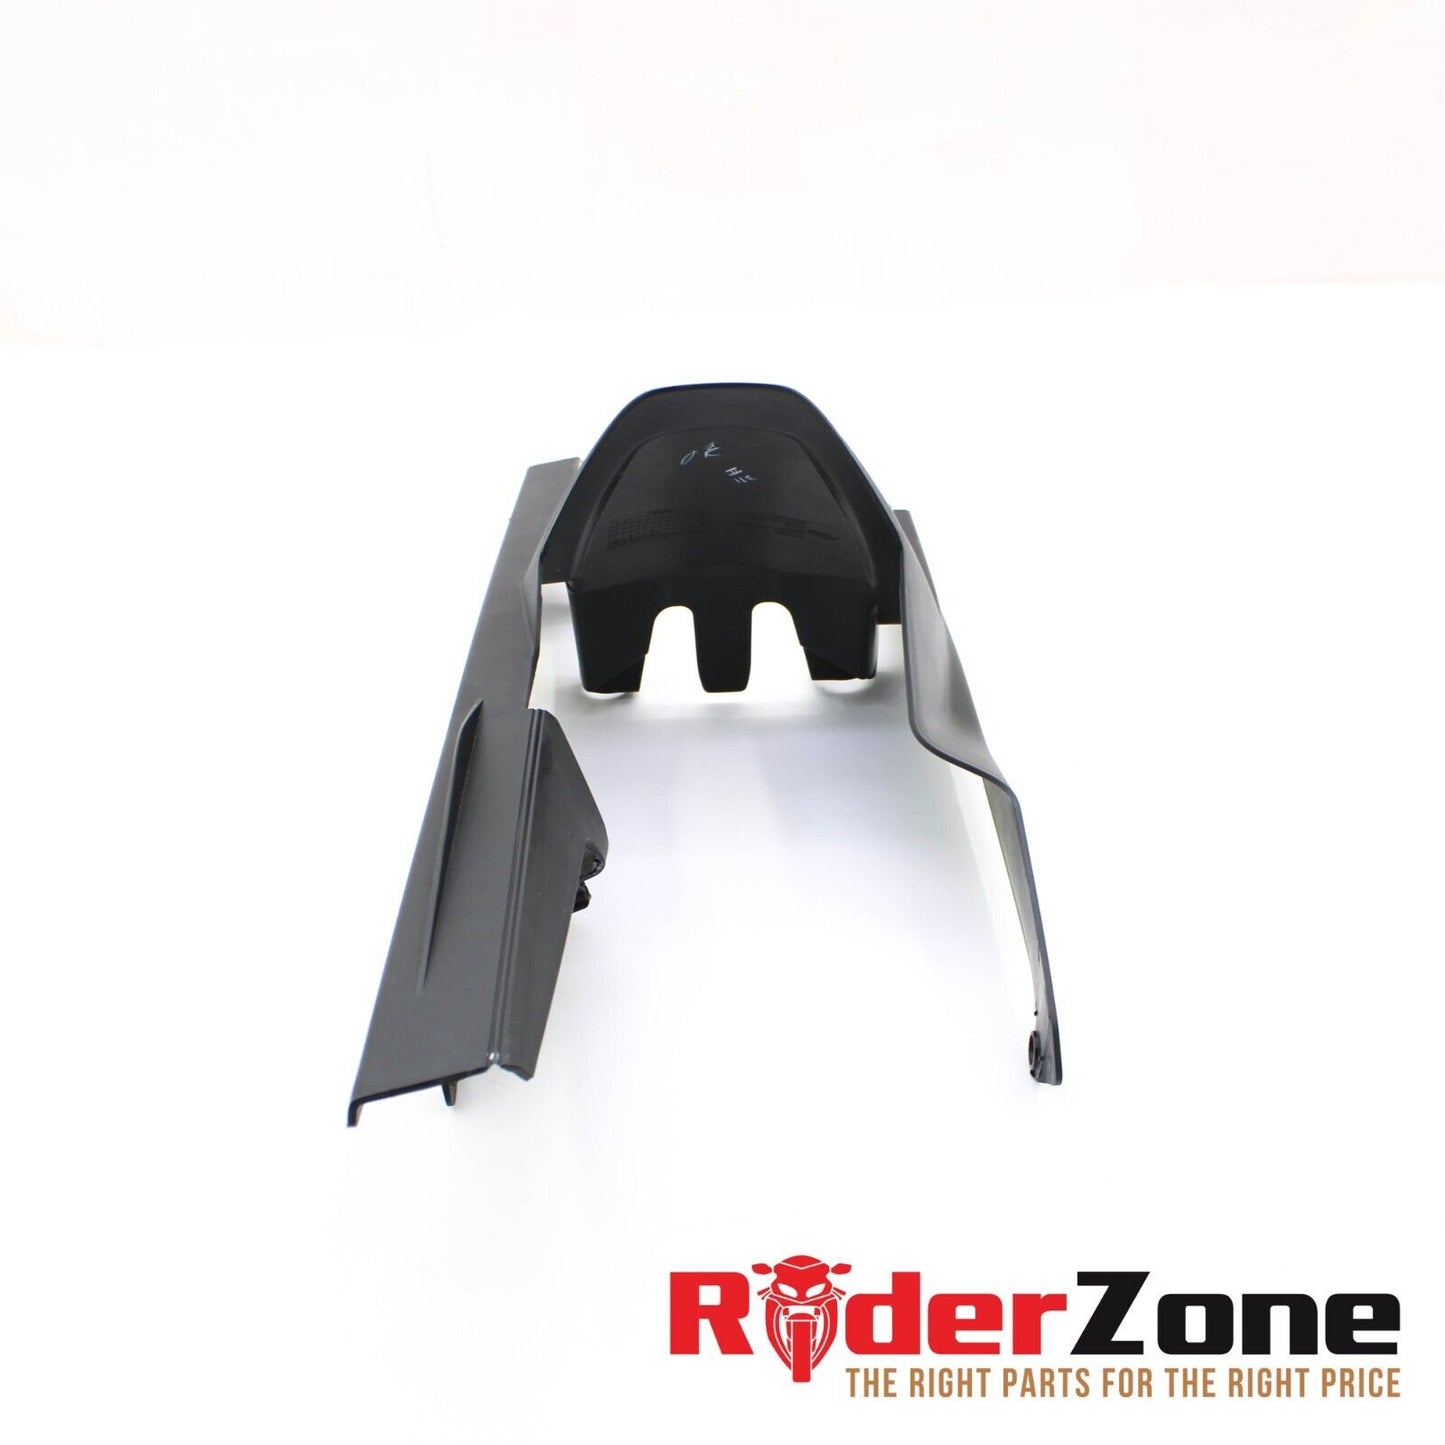 2015 2016 KTM RC390 REAR FENDER GUARD COVER BACK STOCK COMPLETE